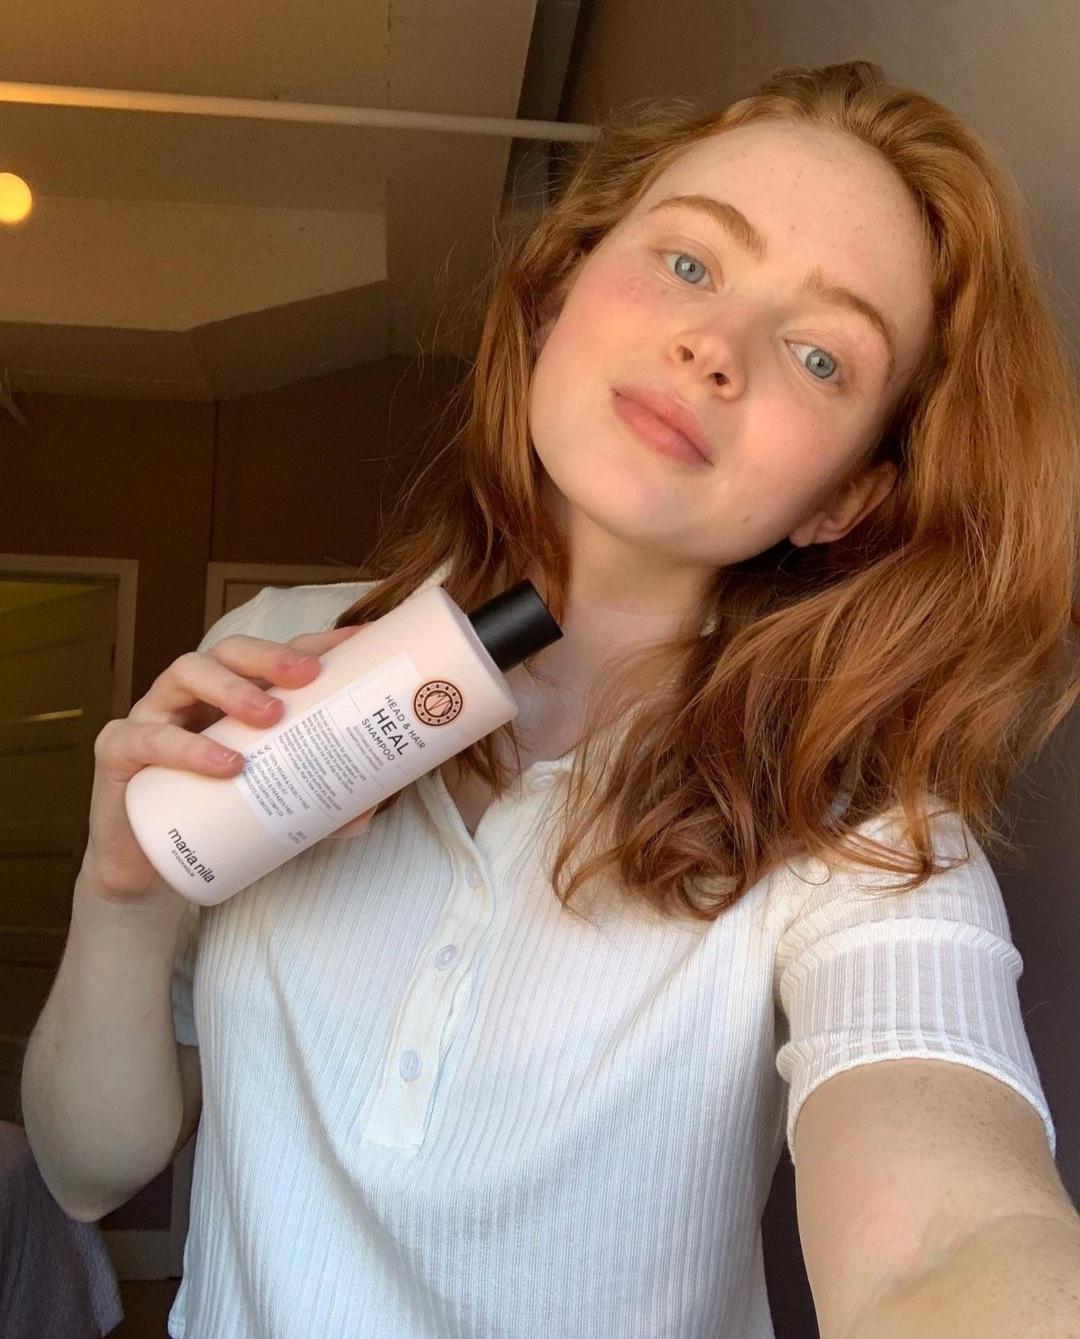 I Really Want To Creampie Sadie Sink And Breed Her Scrolller